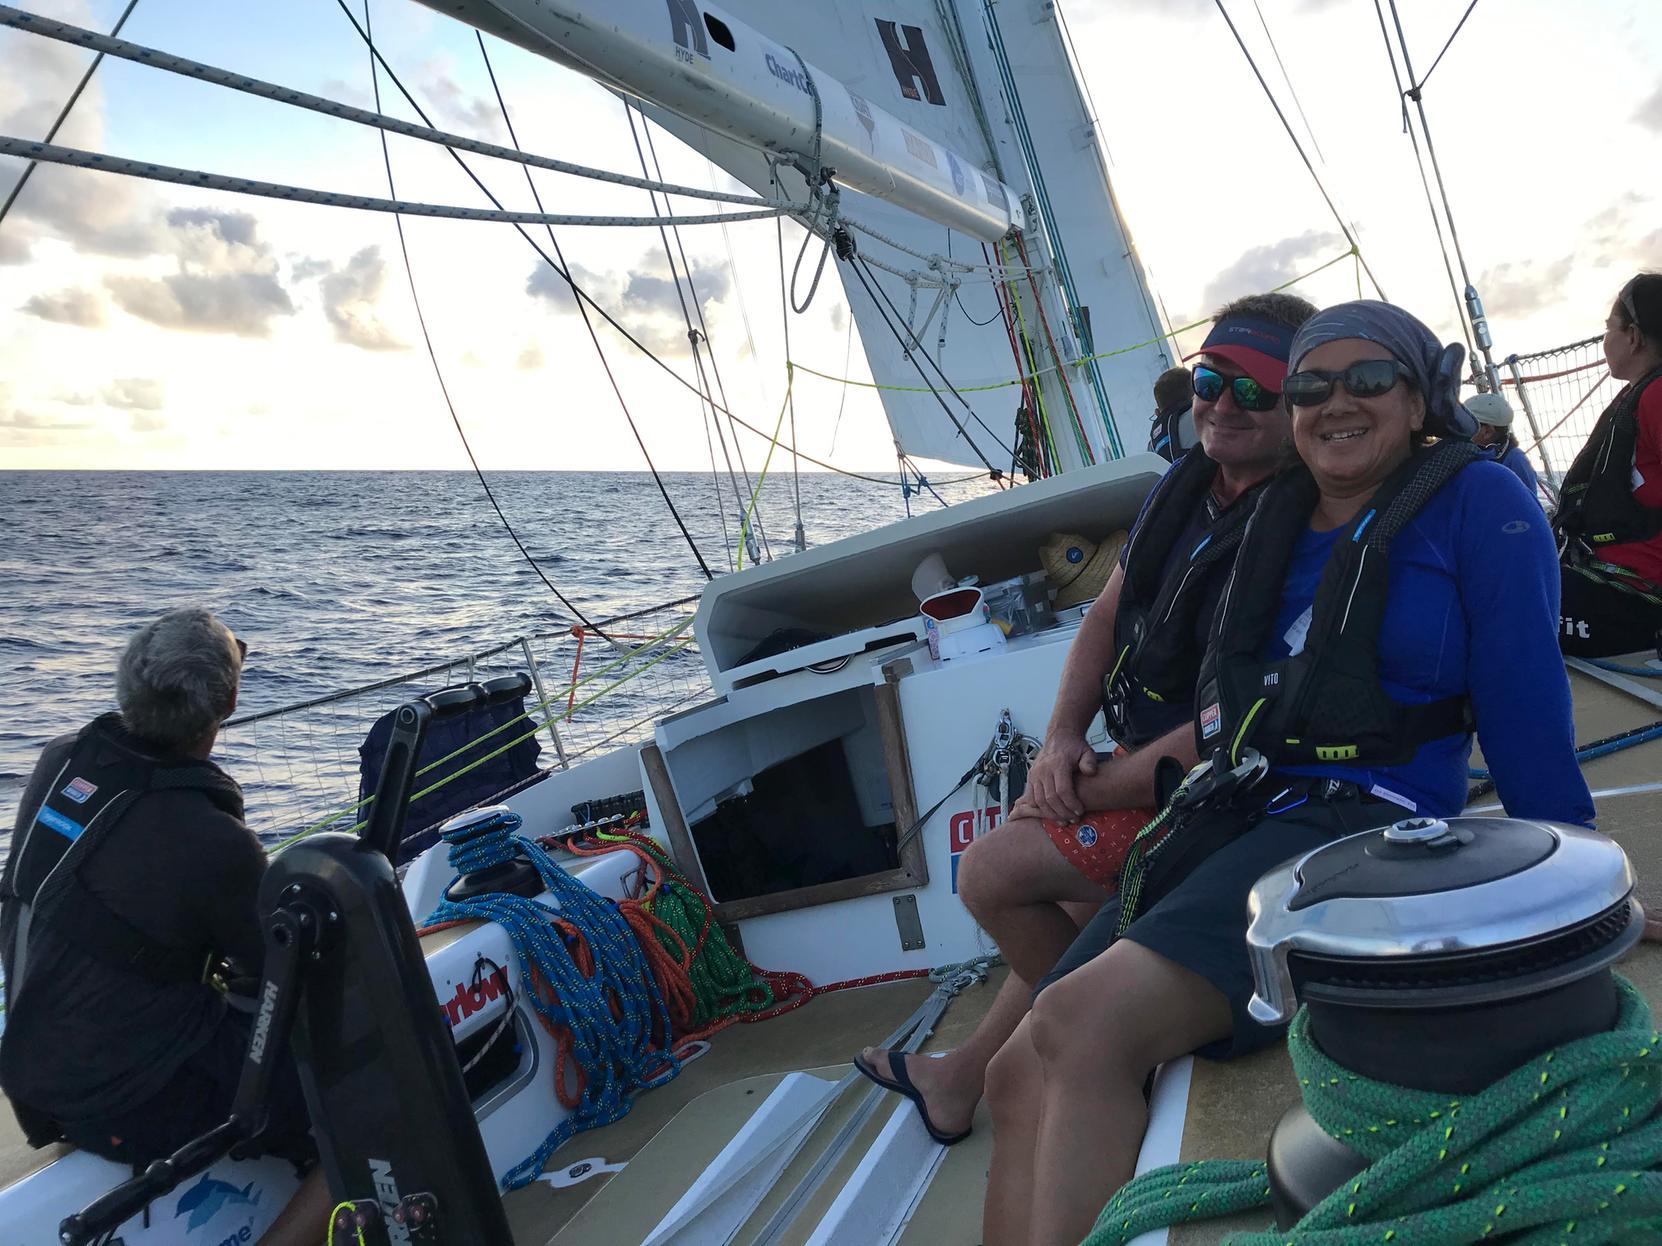 Theresia Cadwallader on the Dare to Lead yacht with her crew mates.